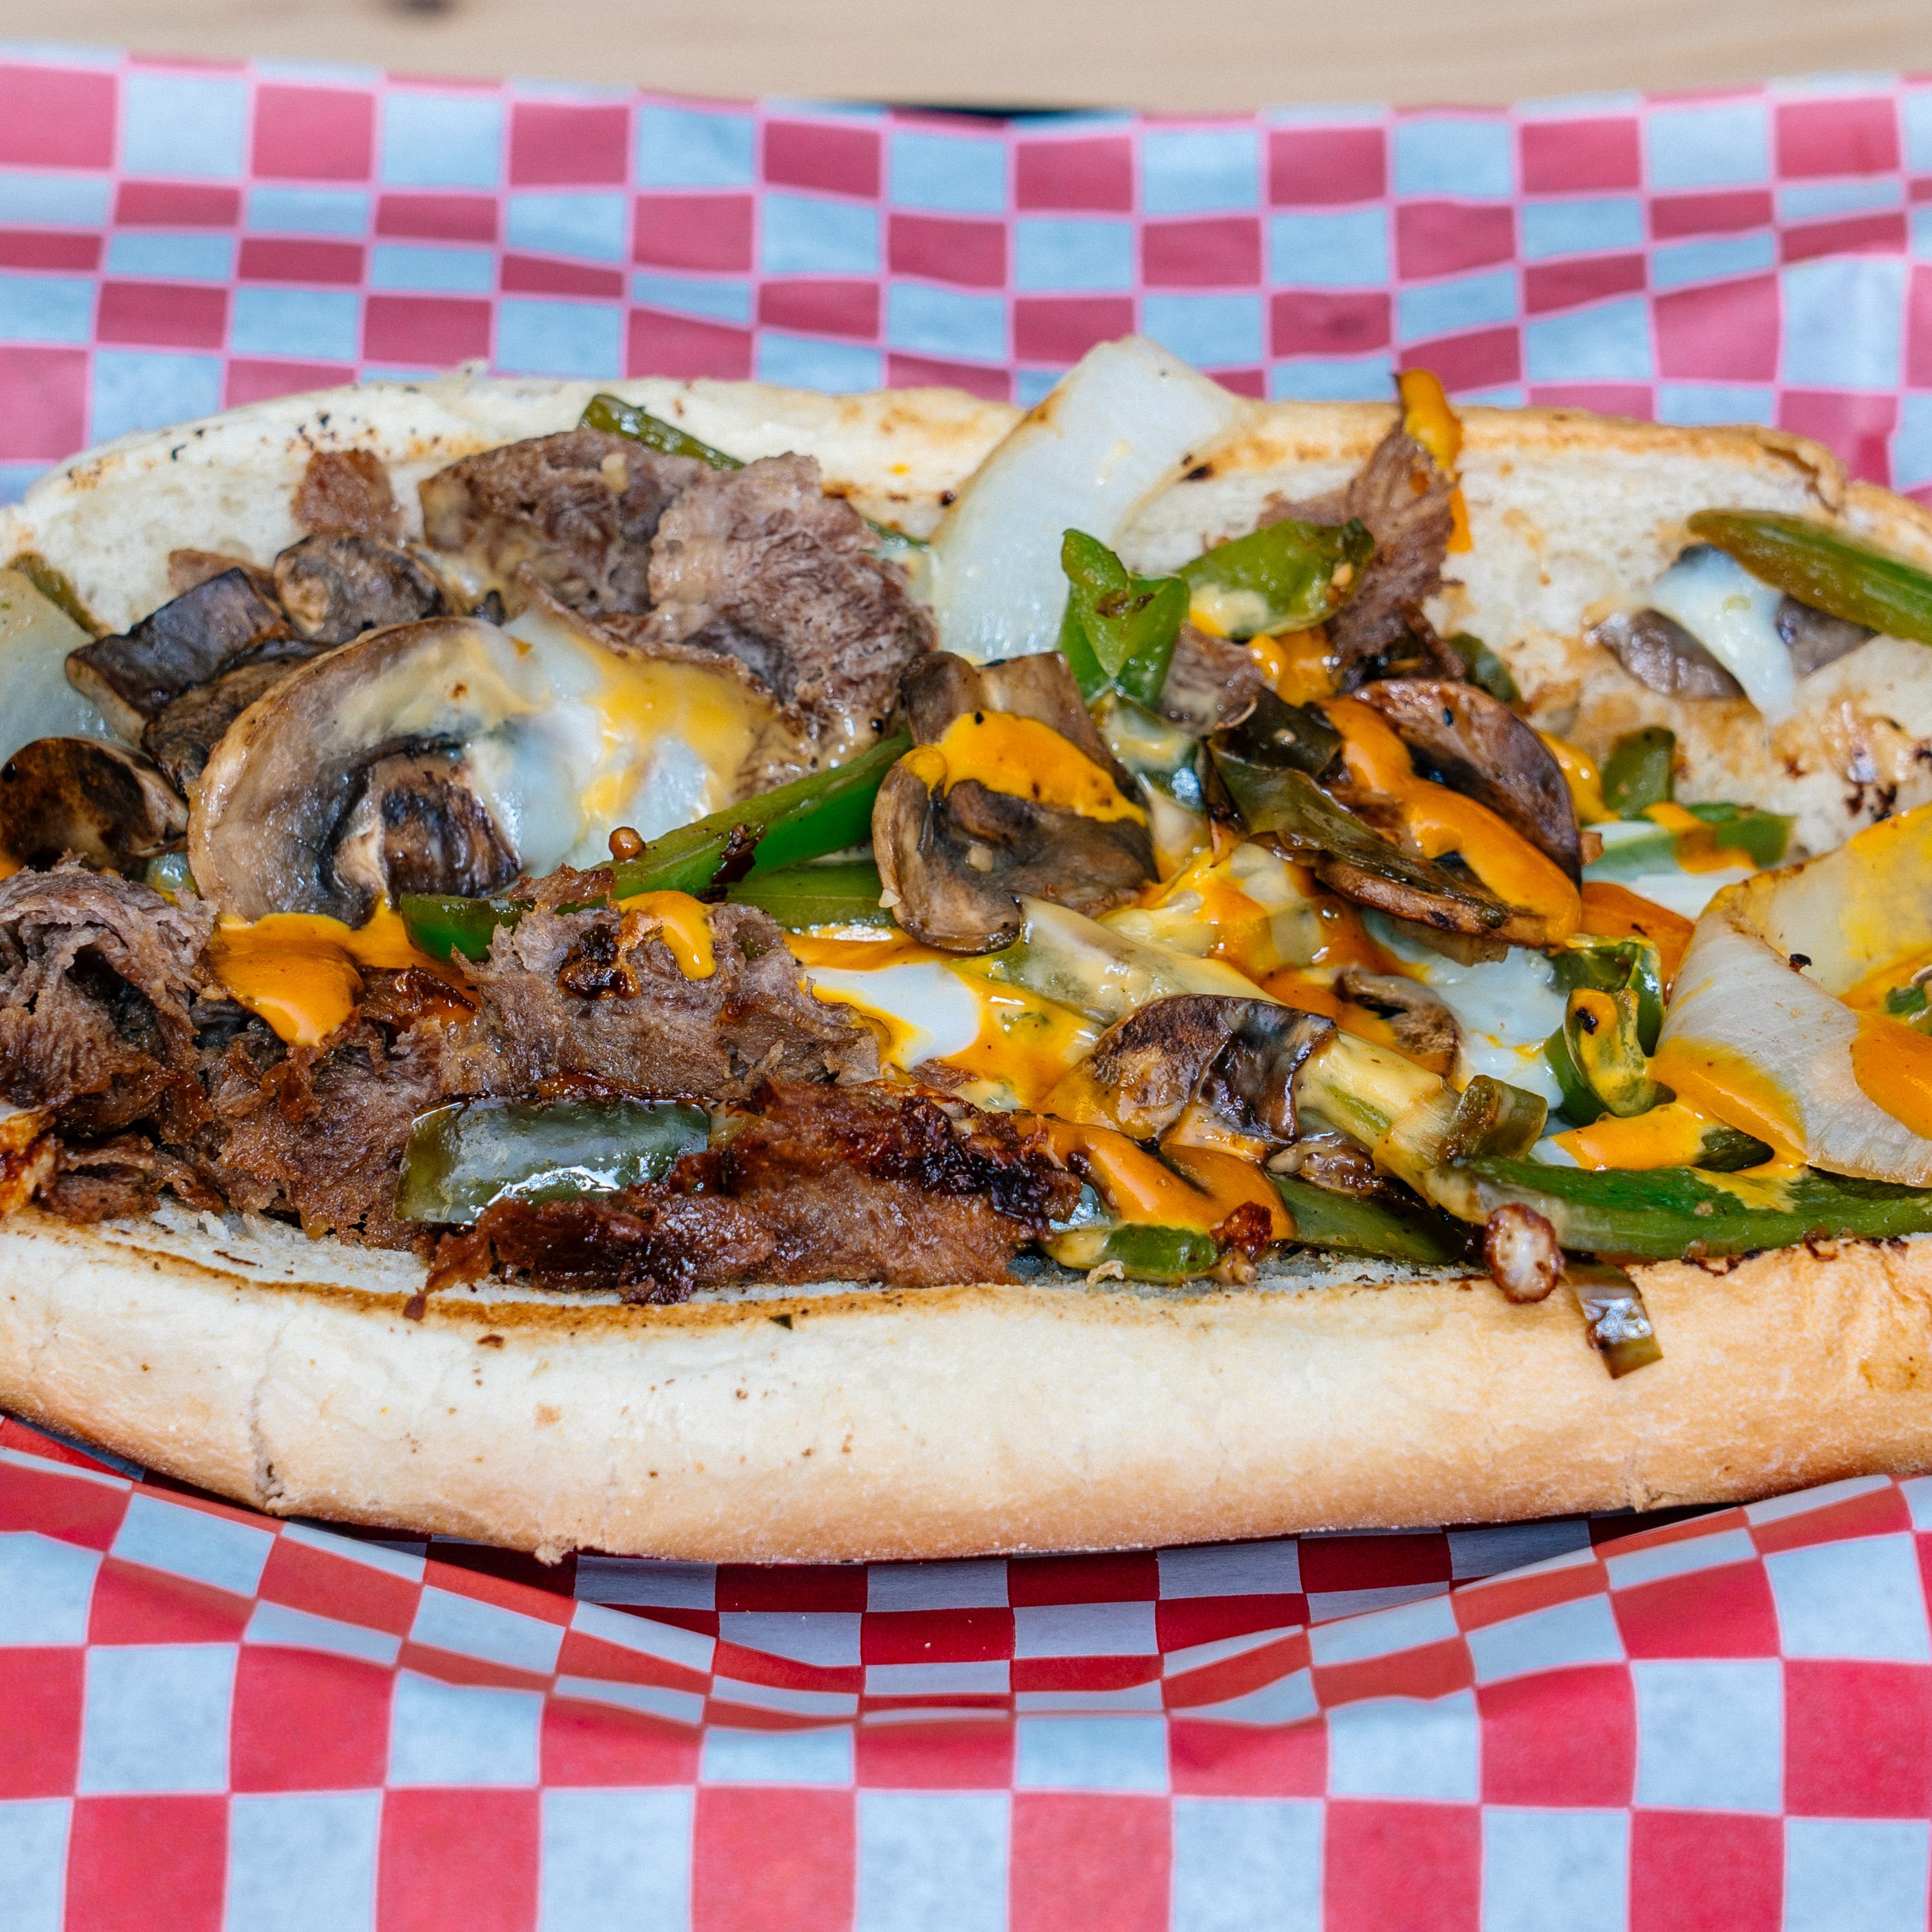 Philly Cheese Steak: A Delicious American Classic